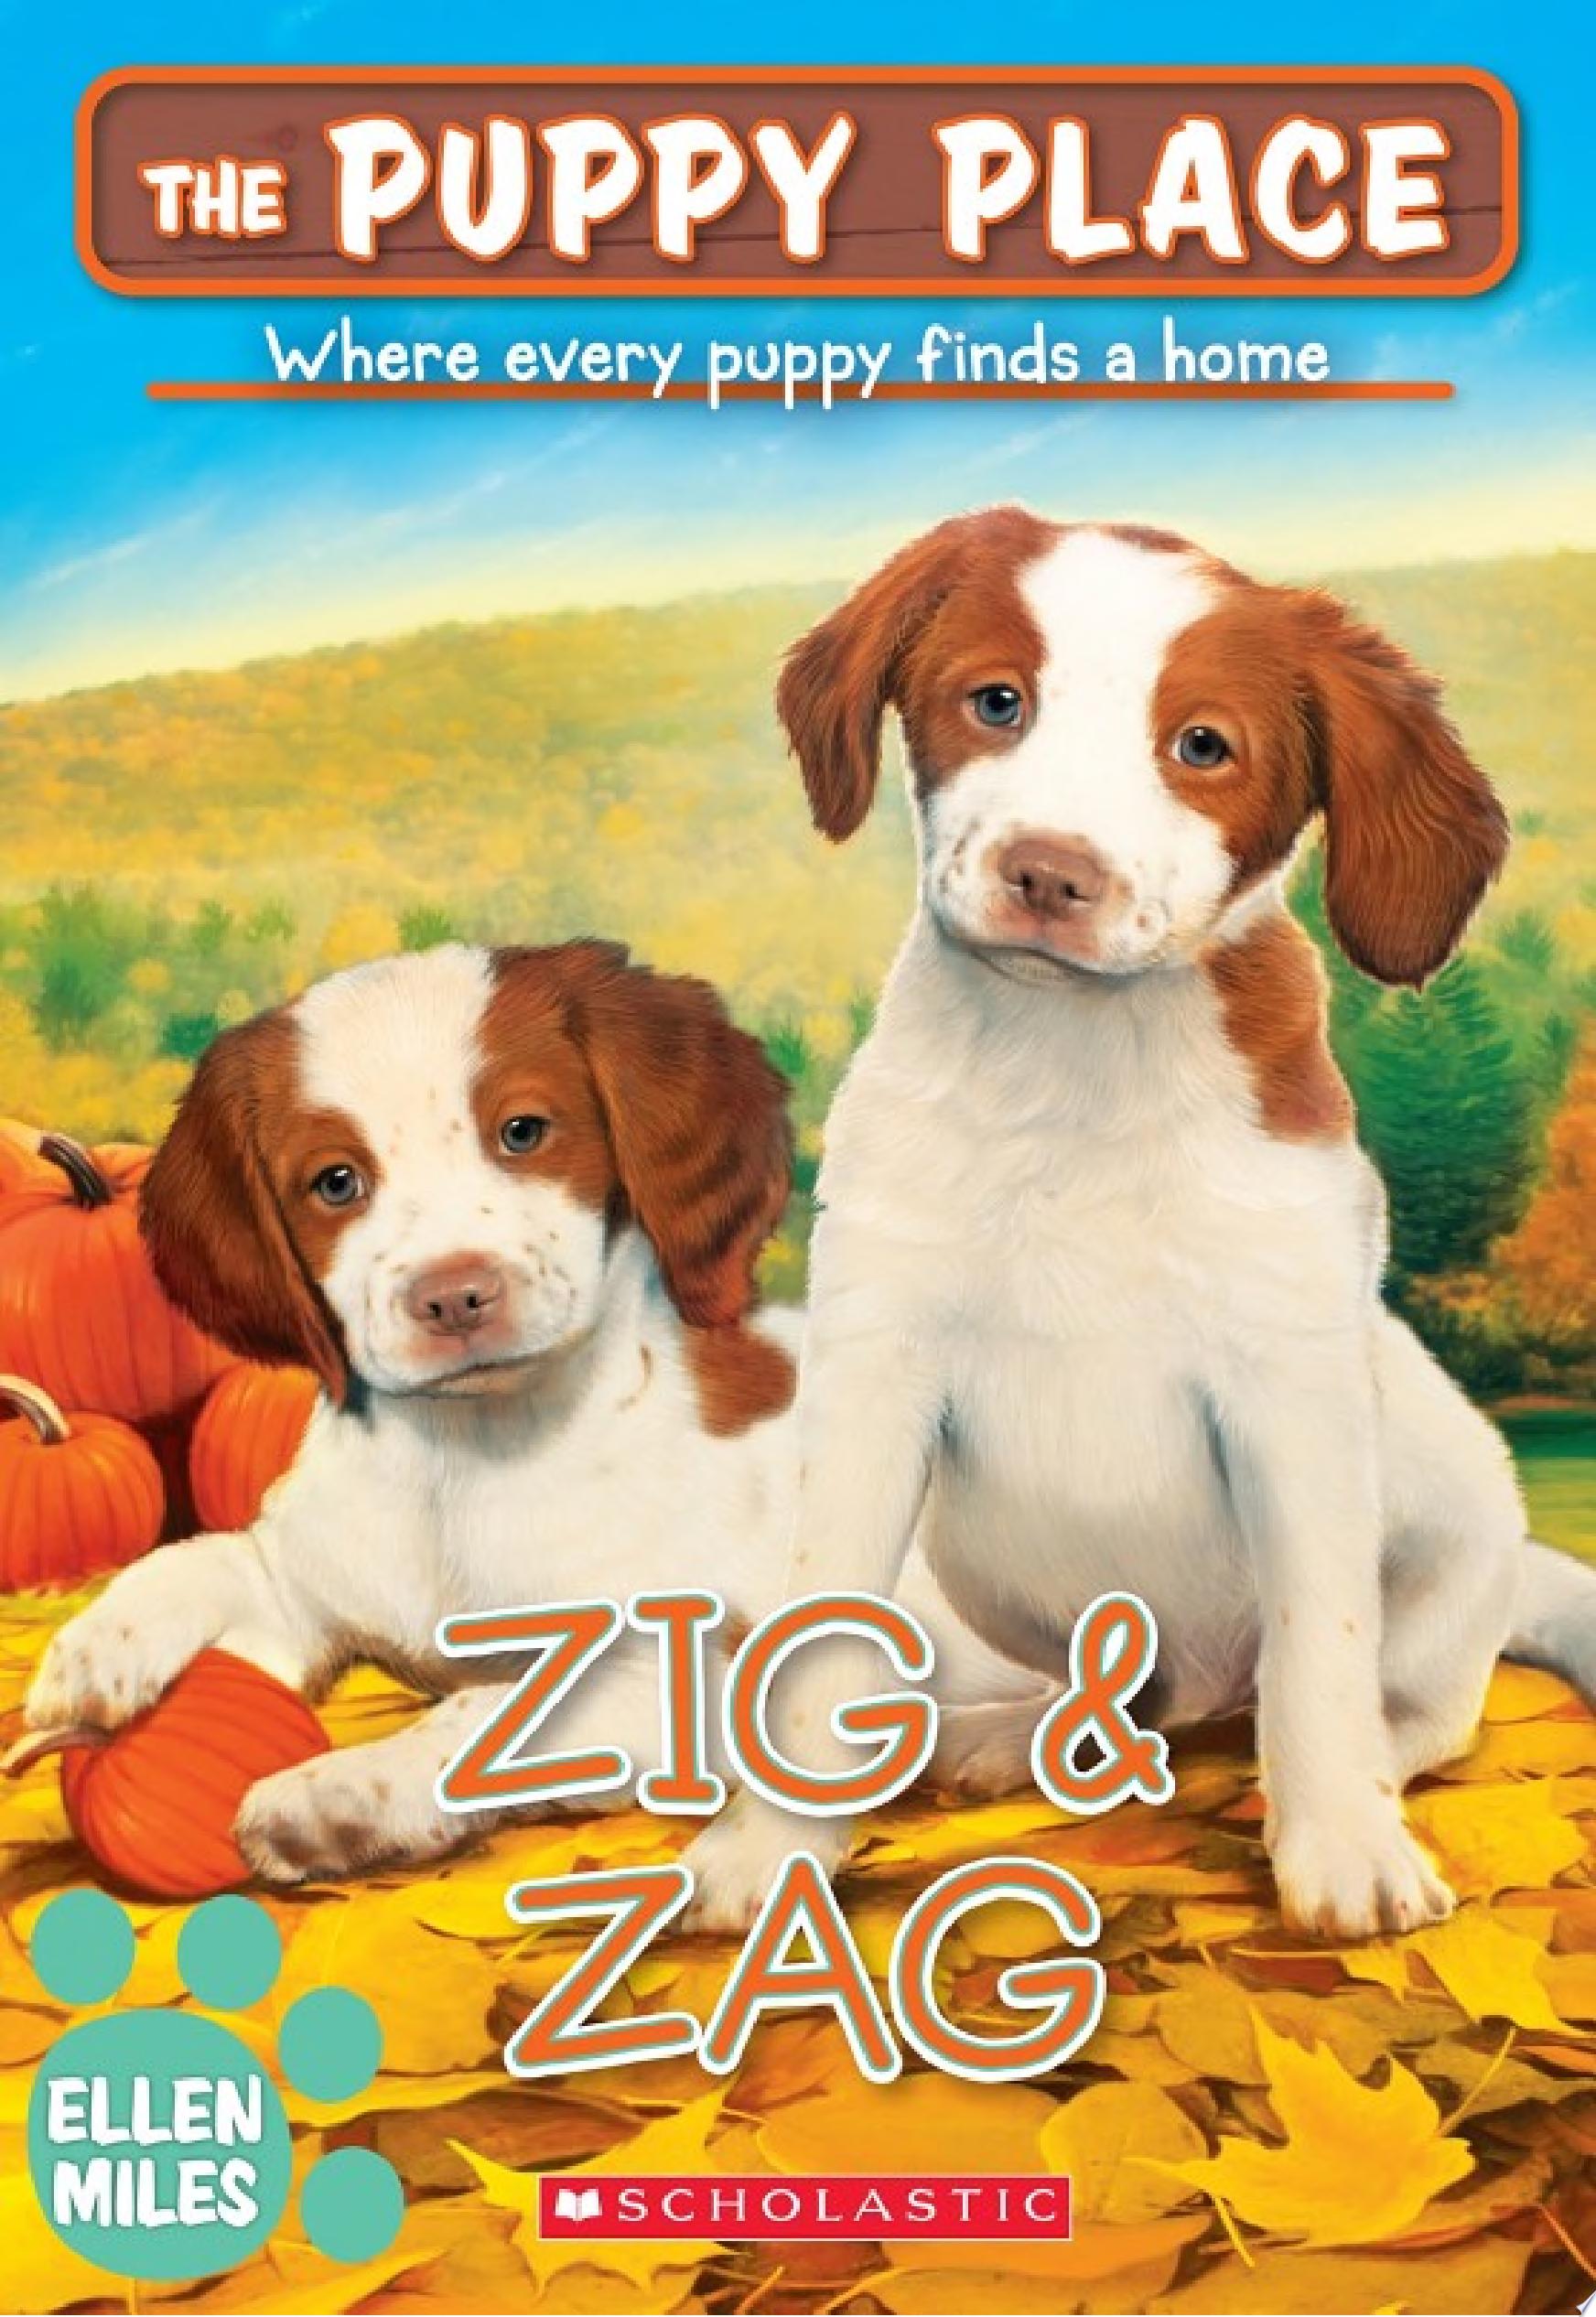 Image for "Zig & Zag (The Puppy Place #64)"